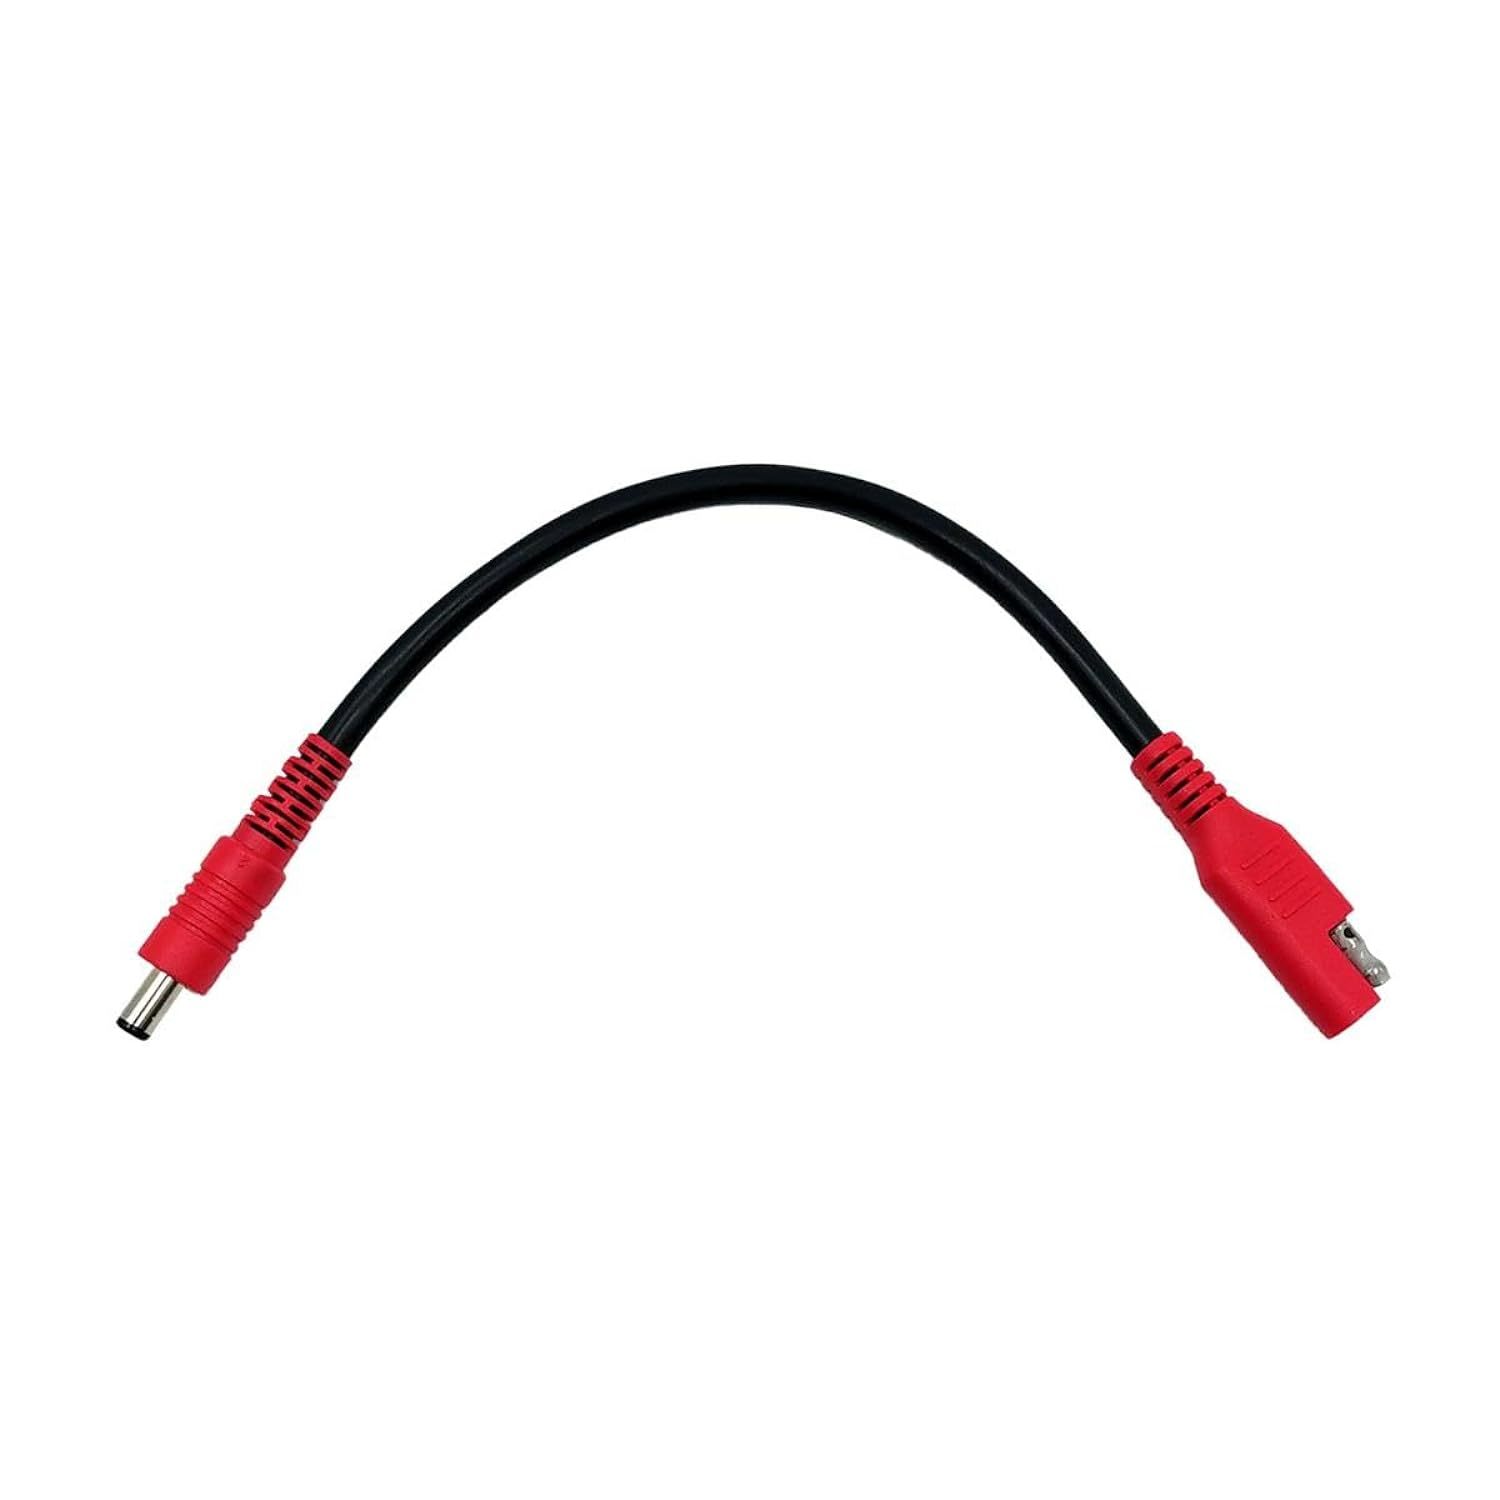 Primary image for Gerbing 12V SAE-to-Male Adapter Cable